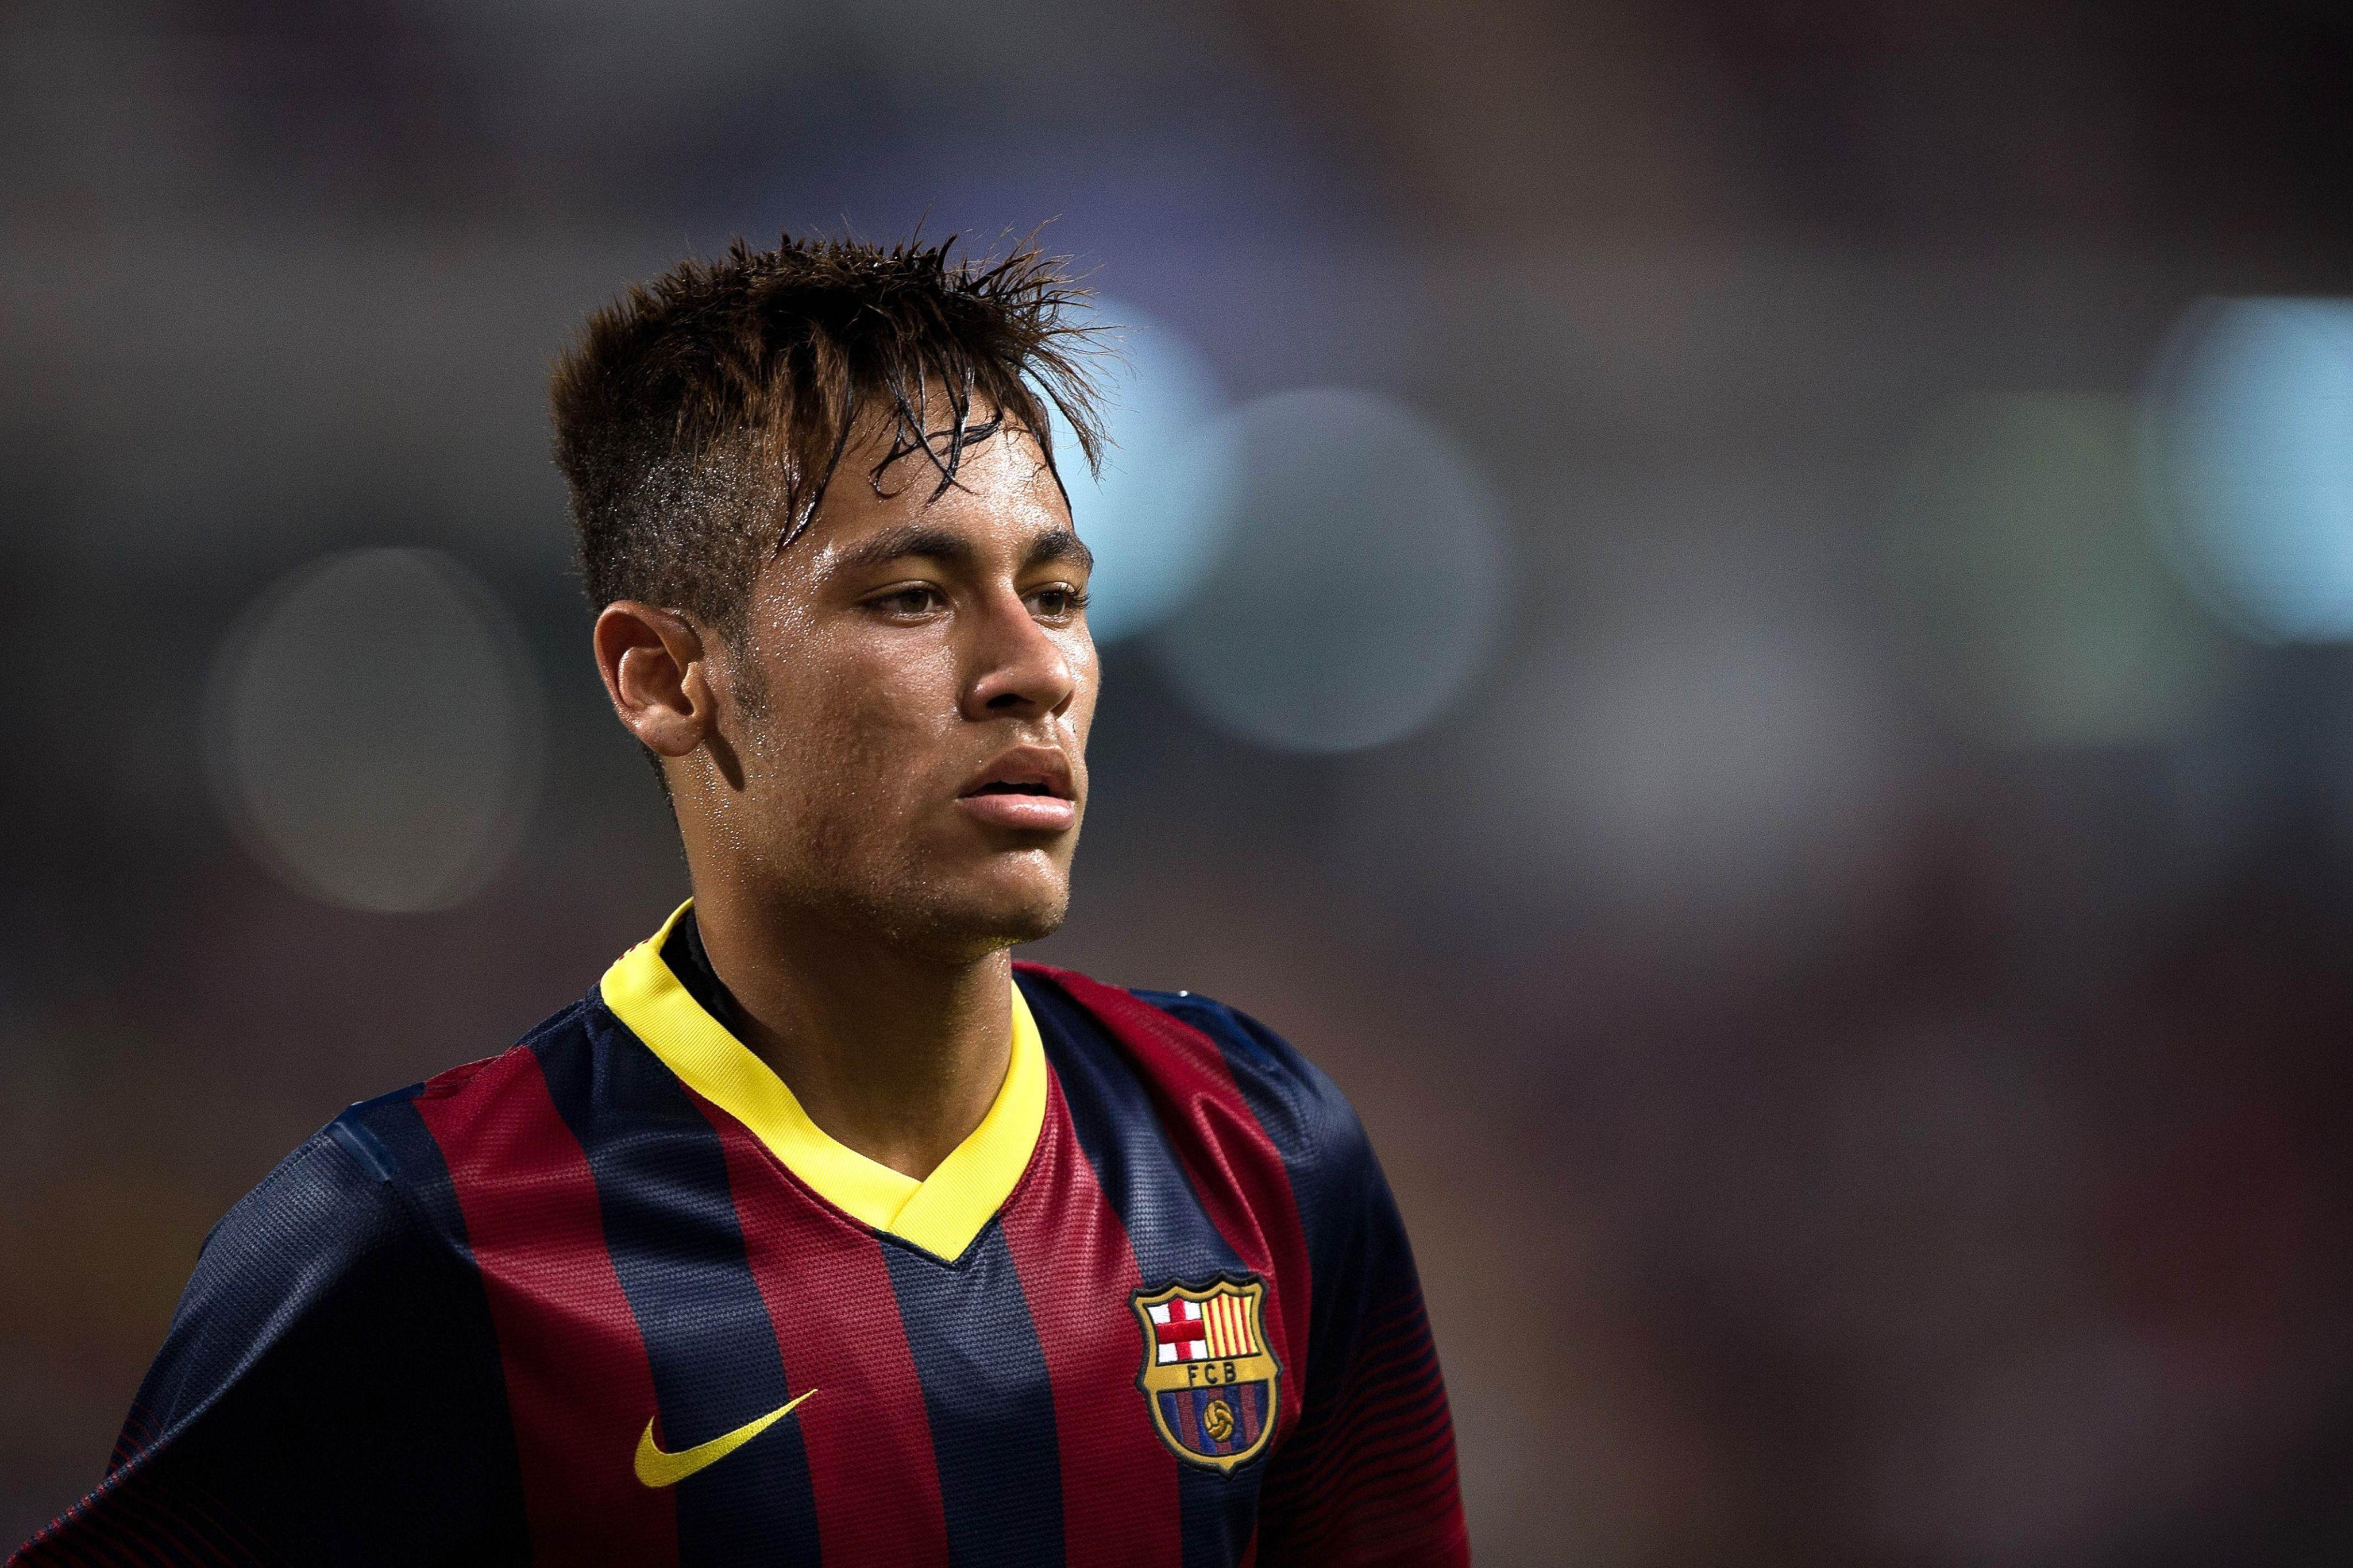 4096 x 2730 · jpeg - Neymar Wallpapers, Pictures, Images